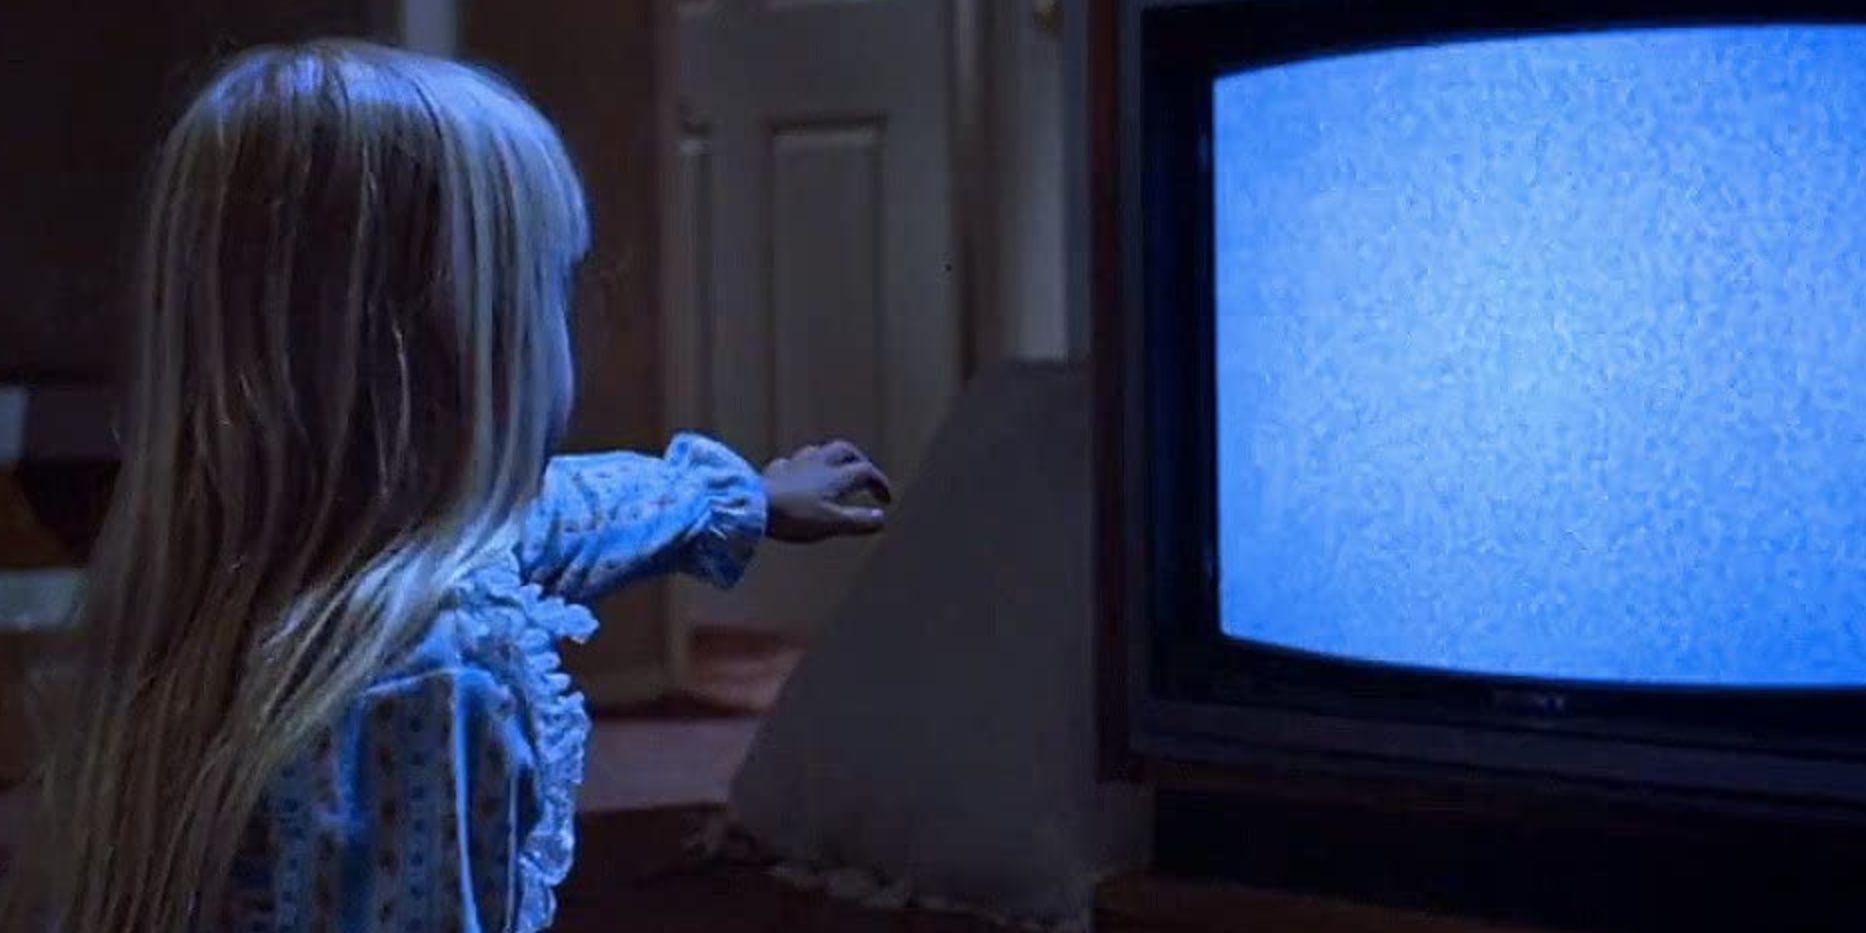 Heather O'Rourke pointing at the TV in 'Poltergeist'